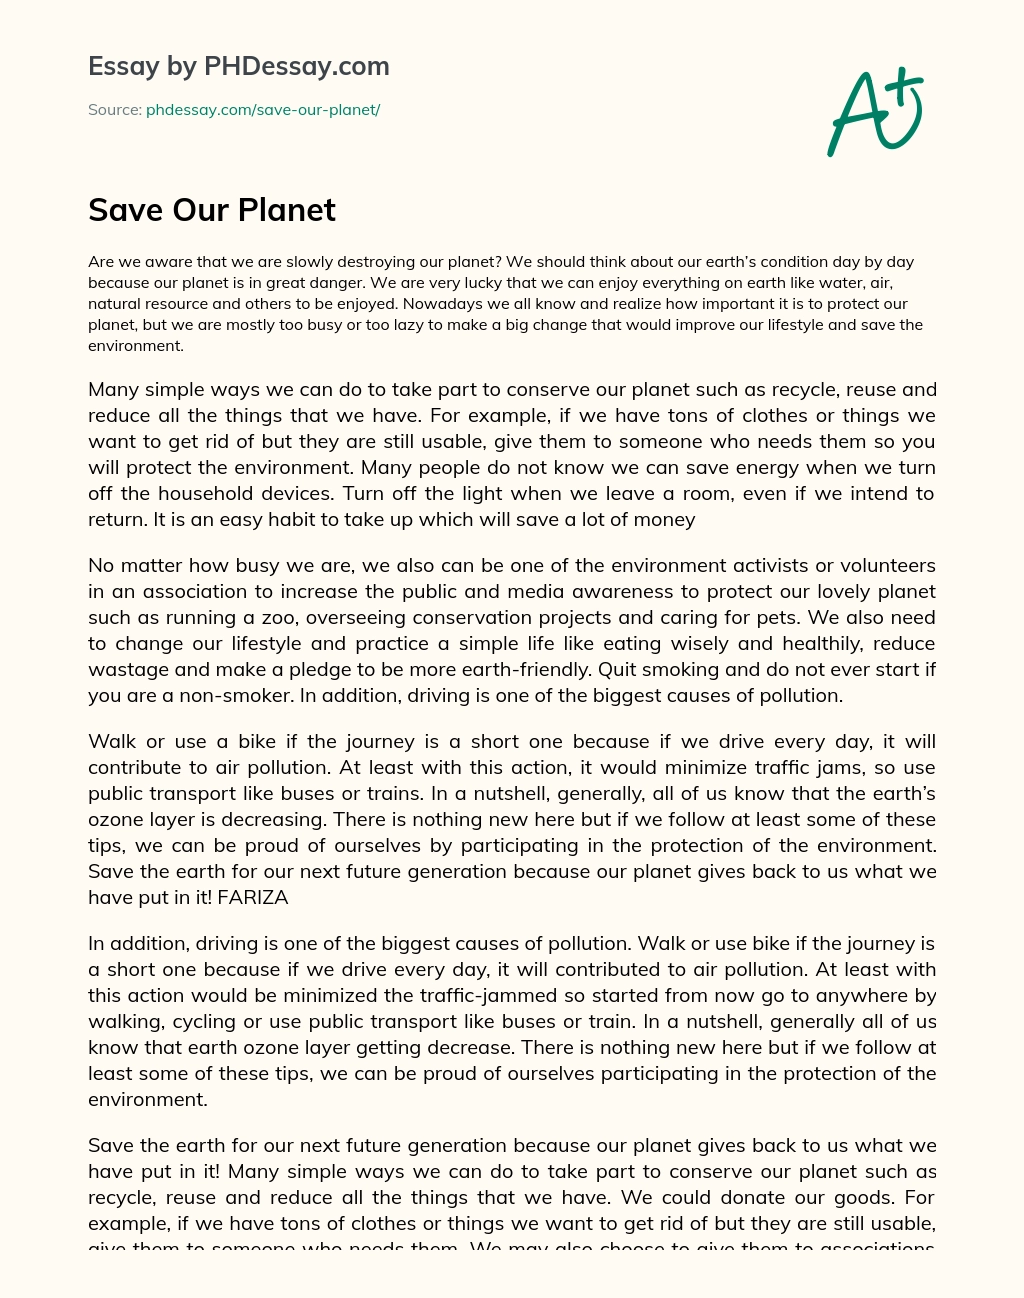 Save Our Planet essay